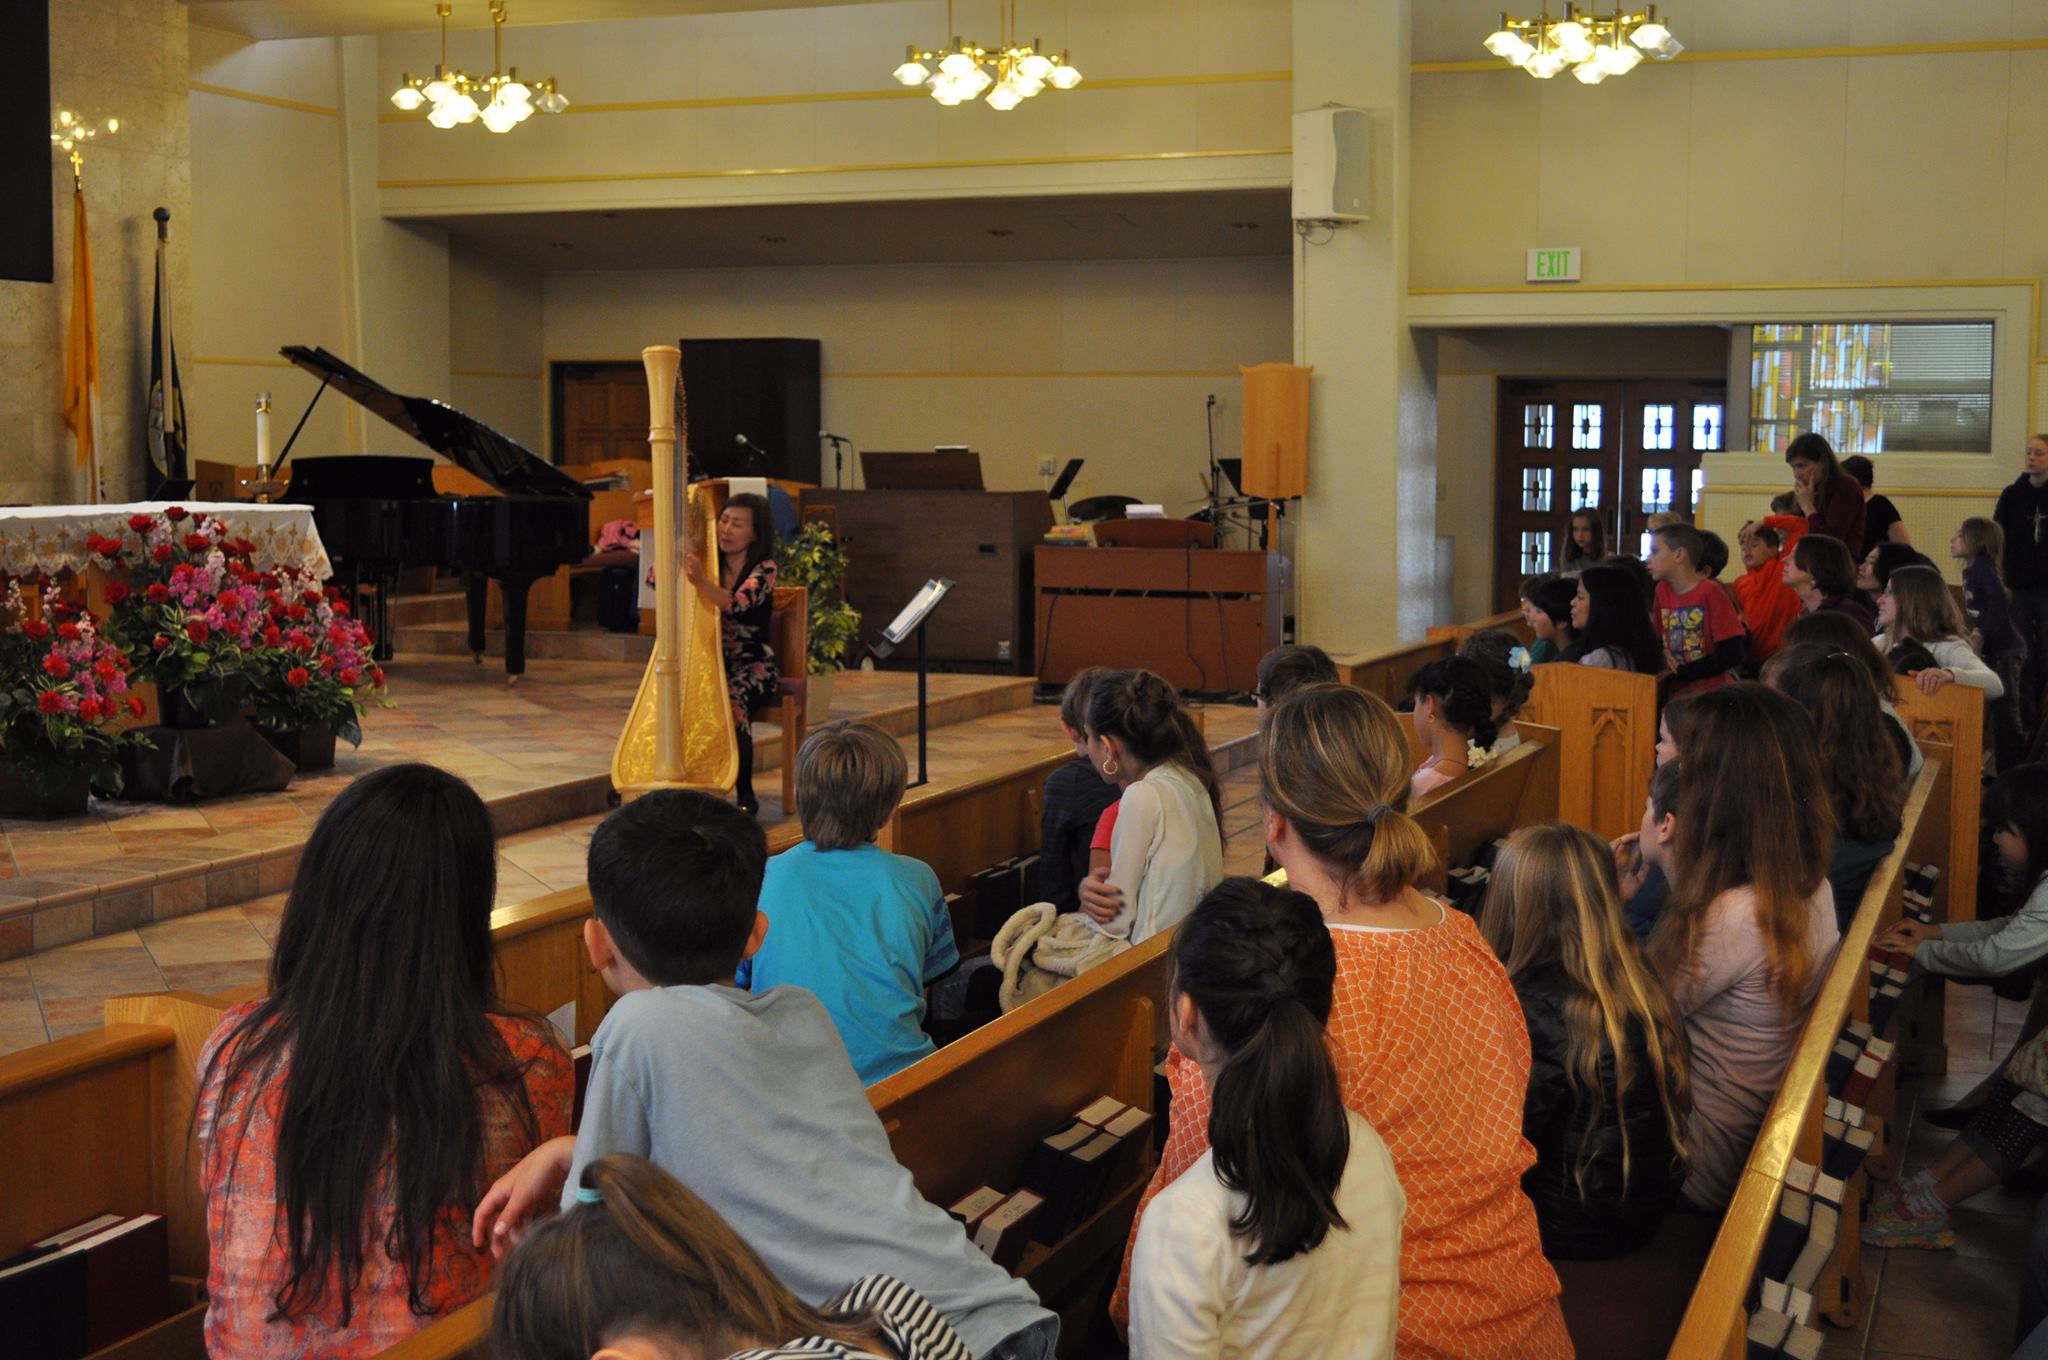  ecture Recital for American-Japanese Homeschoolers for their music class at the Chapel of Hope Church. 